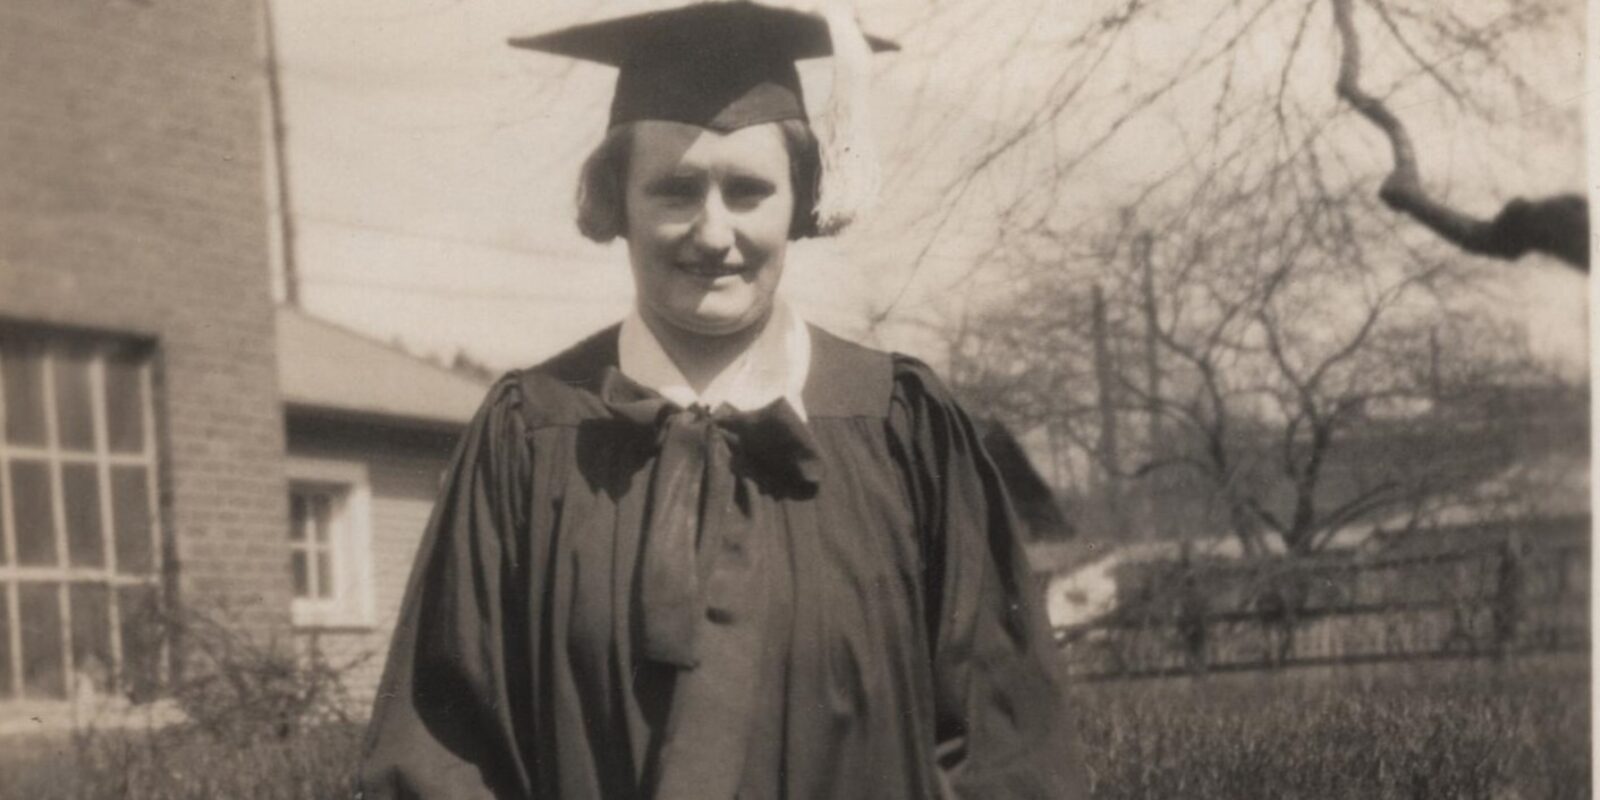 Eloise Green in Ohio State graduation outfit in 1928